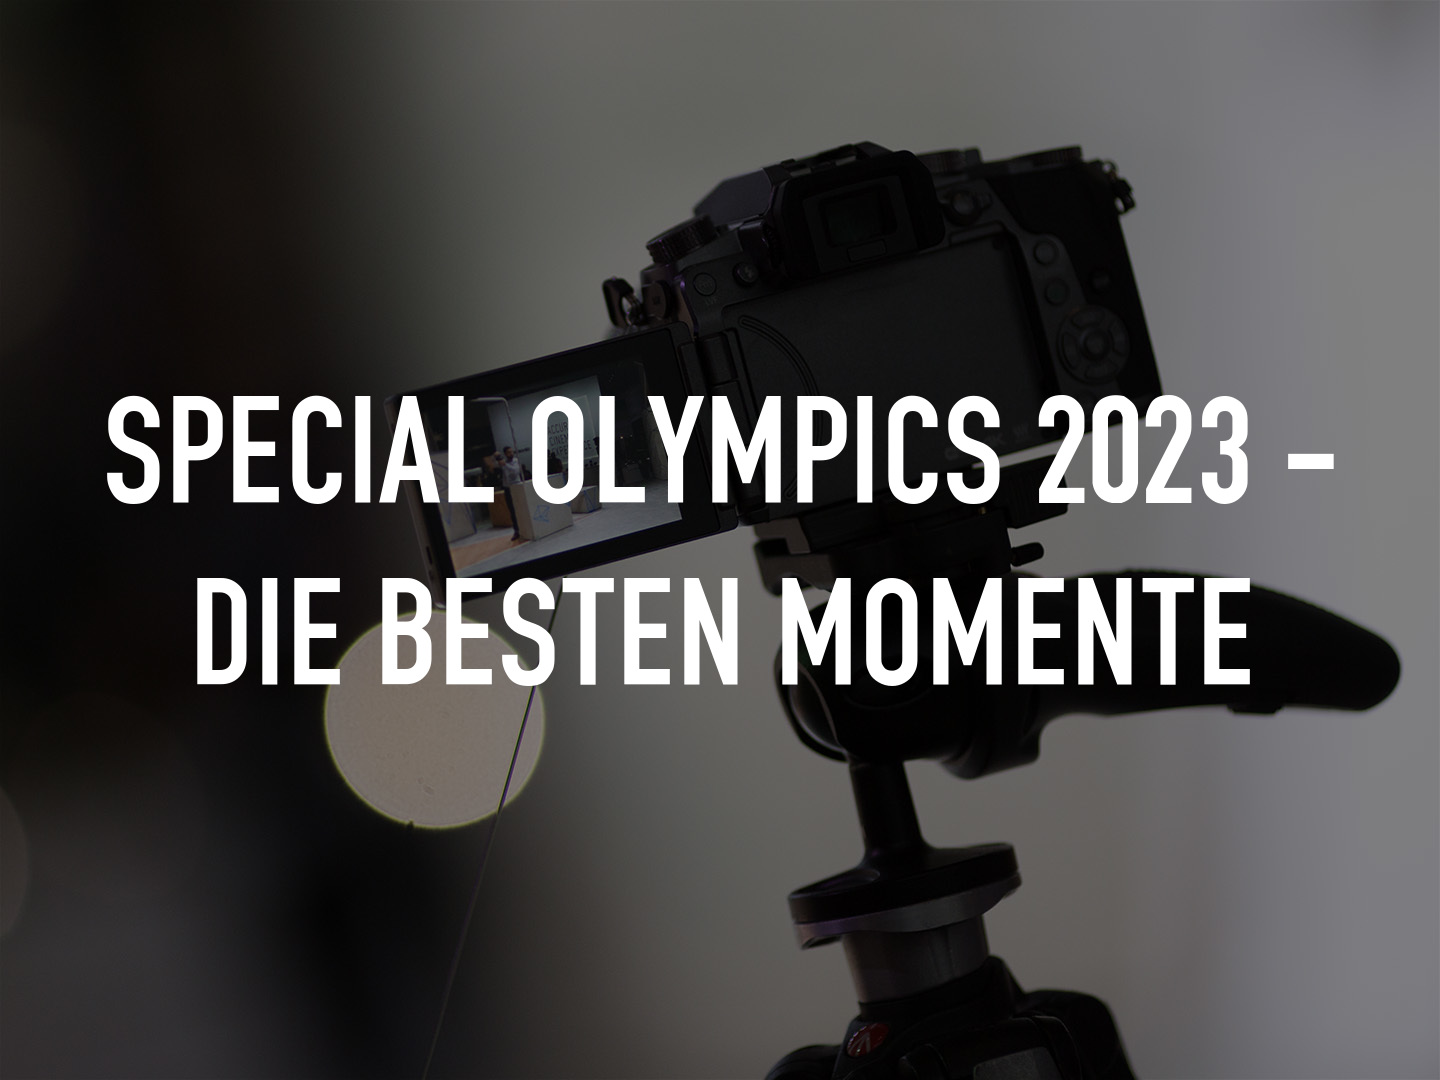 Special Olympics 2023 - Die besten Momente on TV | Channels and ...